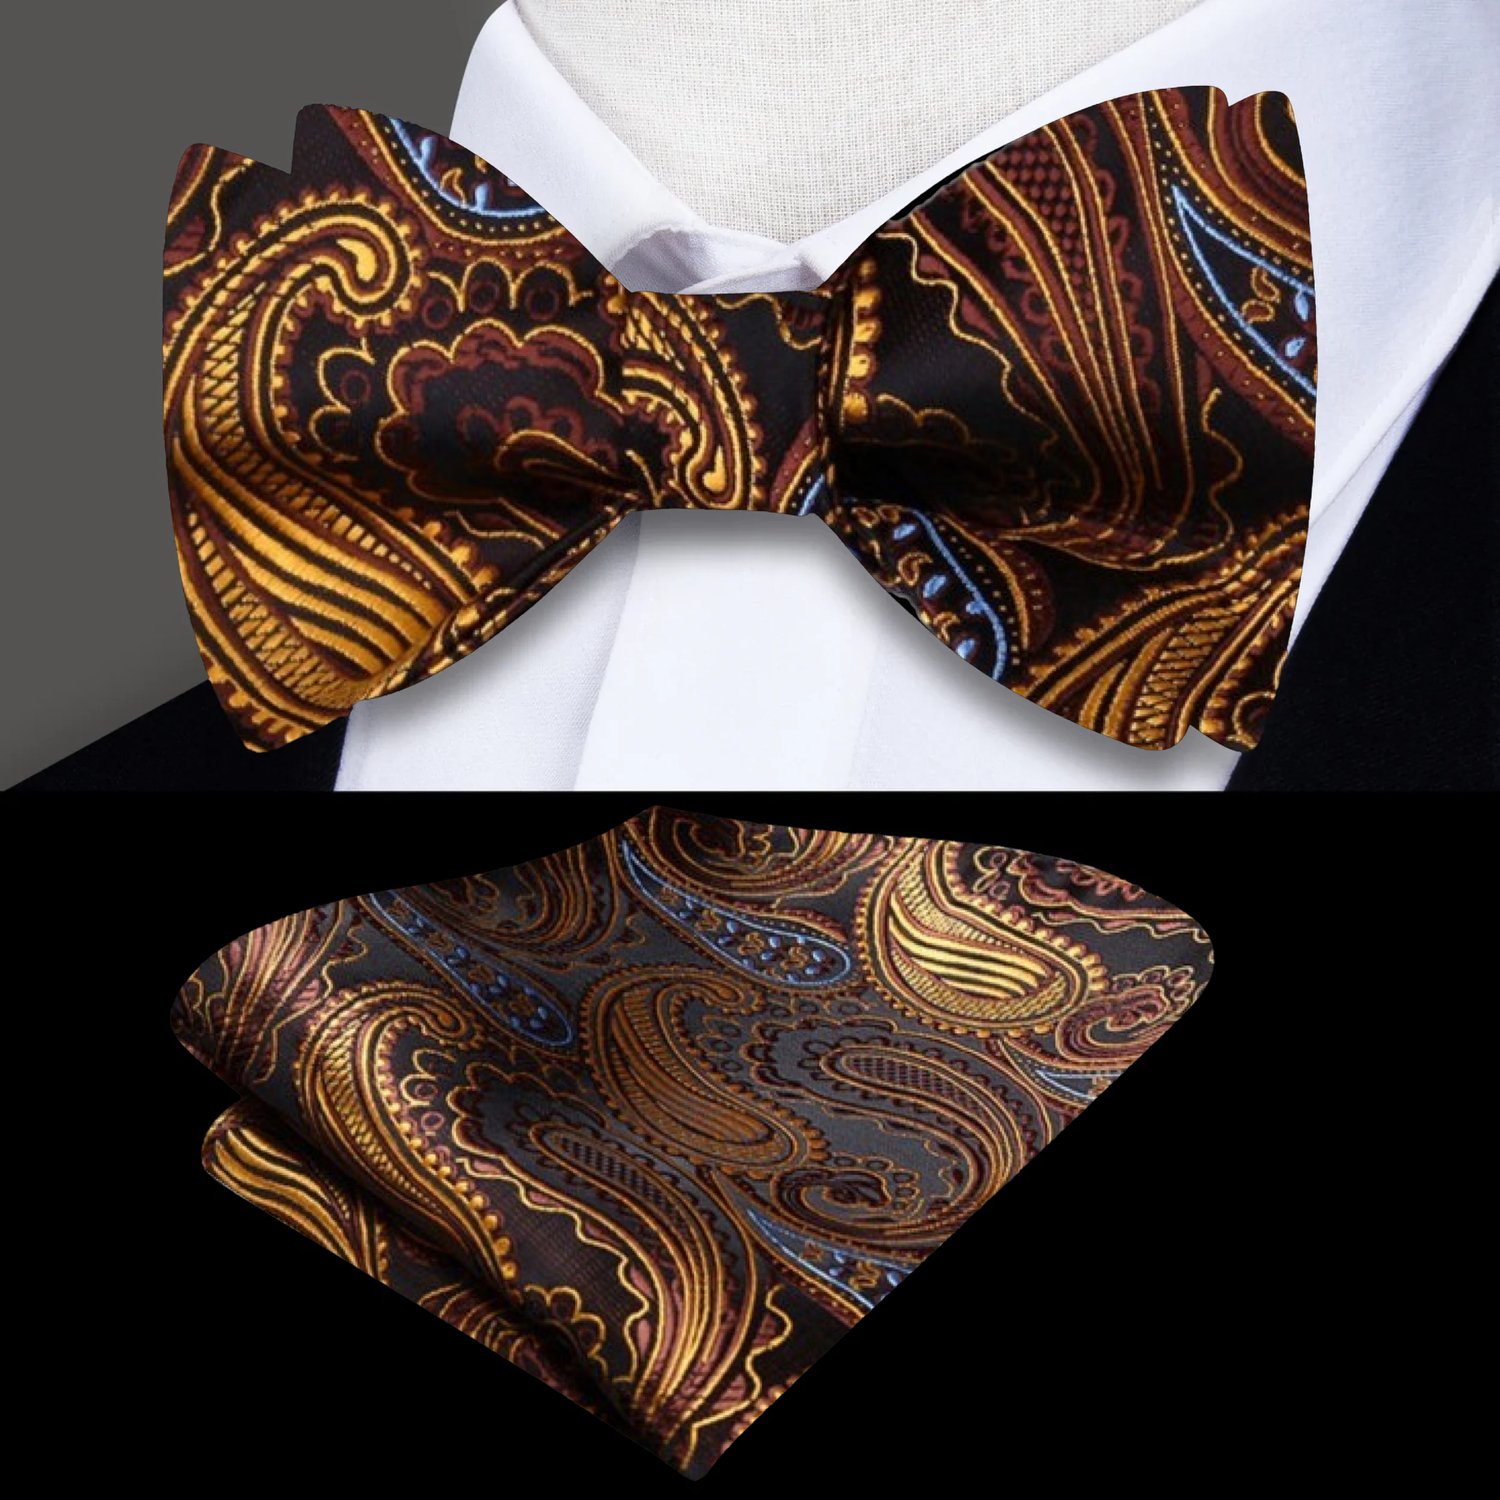 A Gold, Brown Paisley Pattern Silk Self Tie Bow Tie, Matching Pocket Square